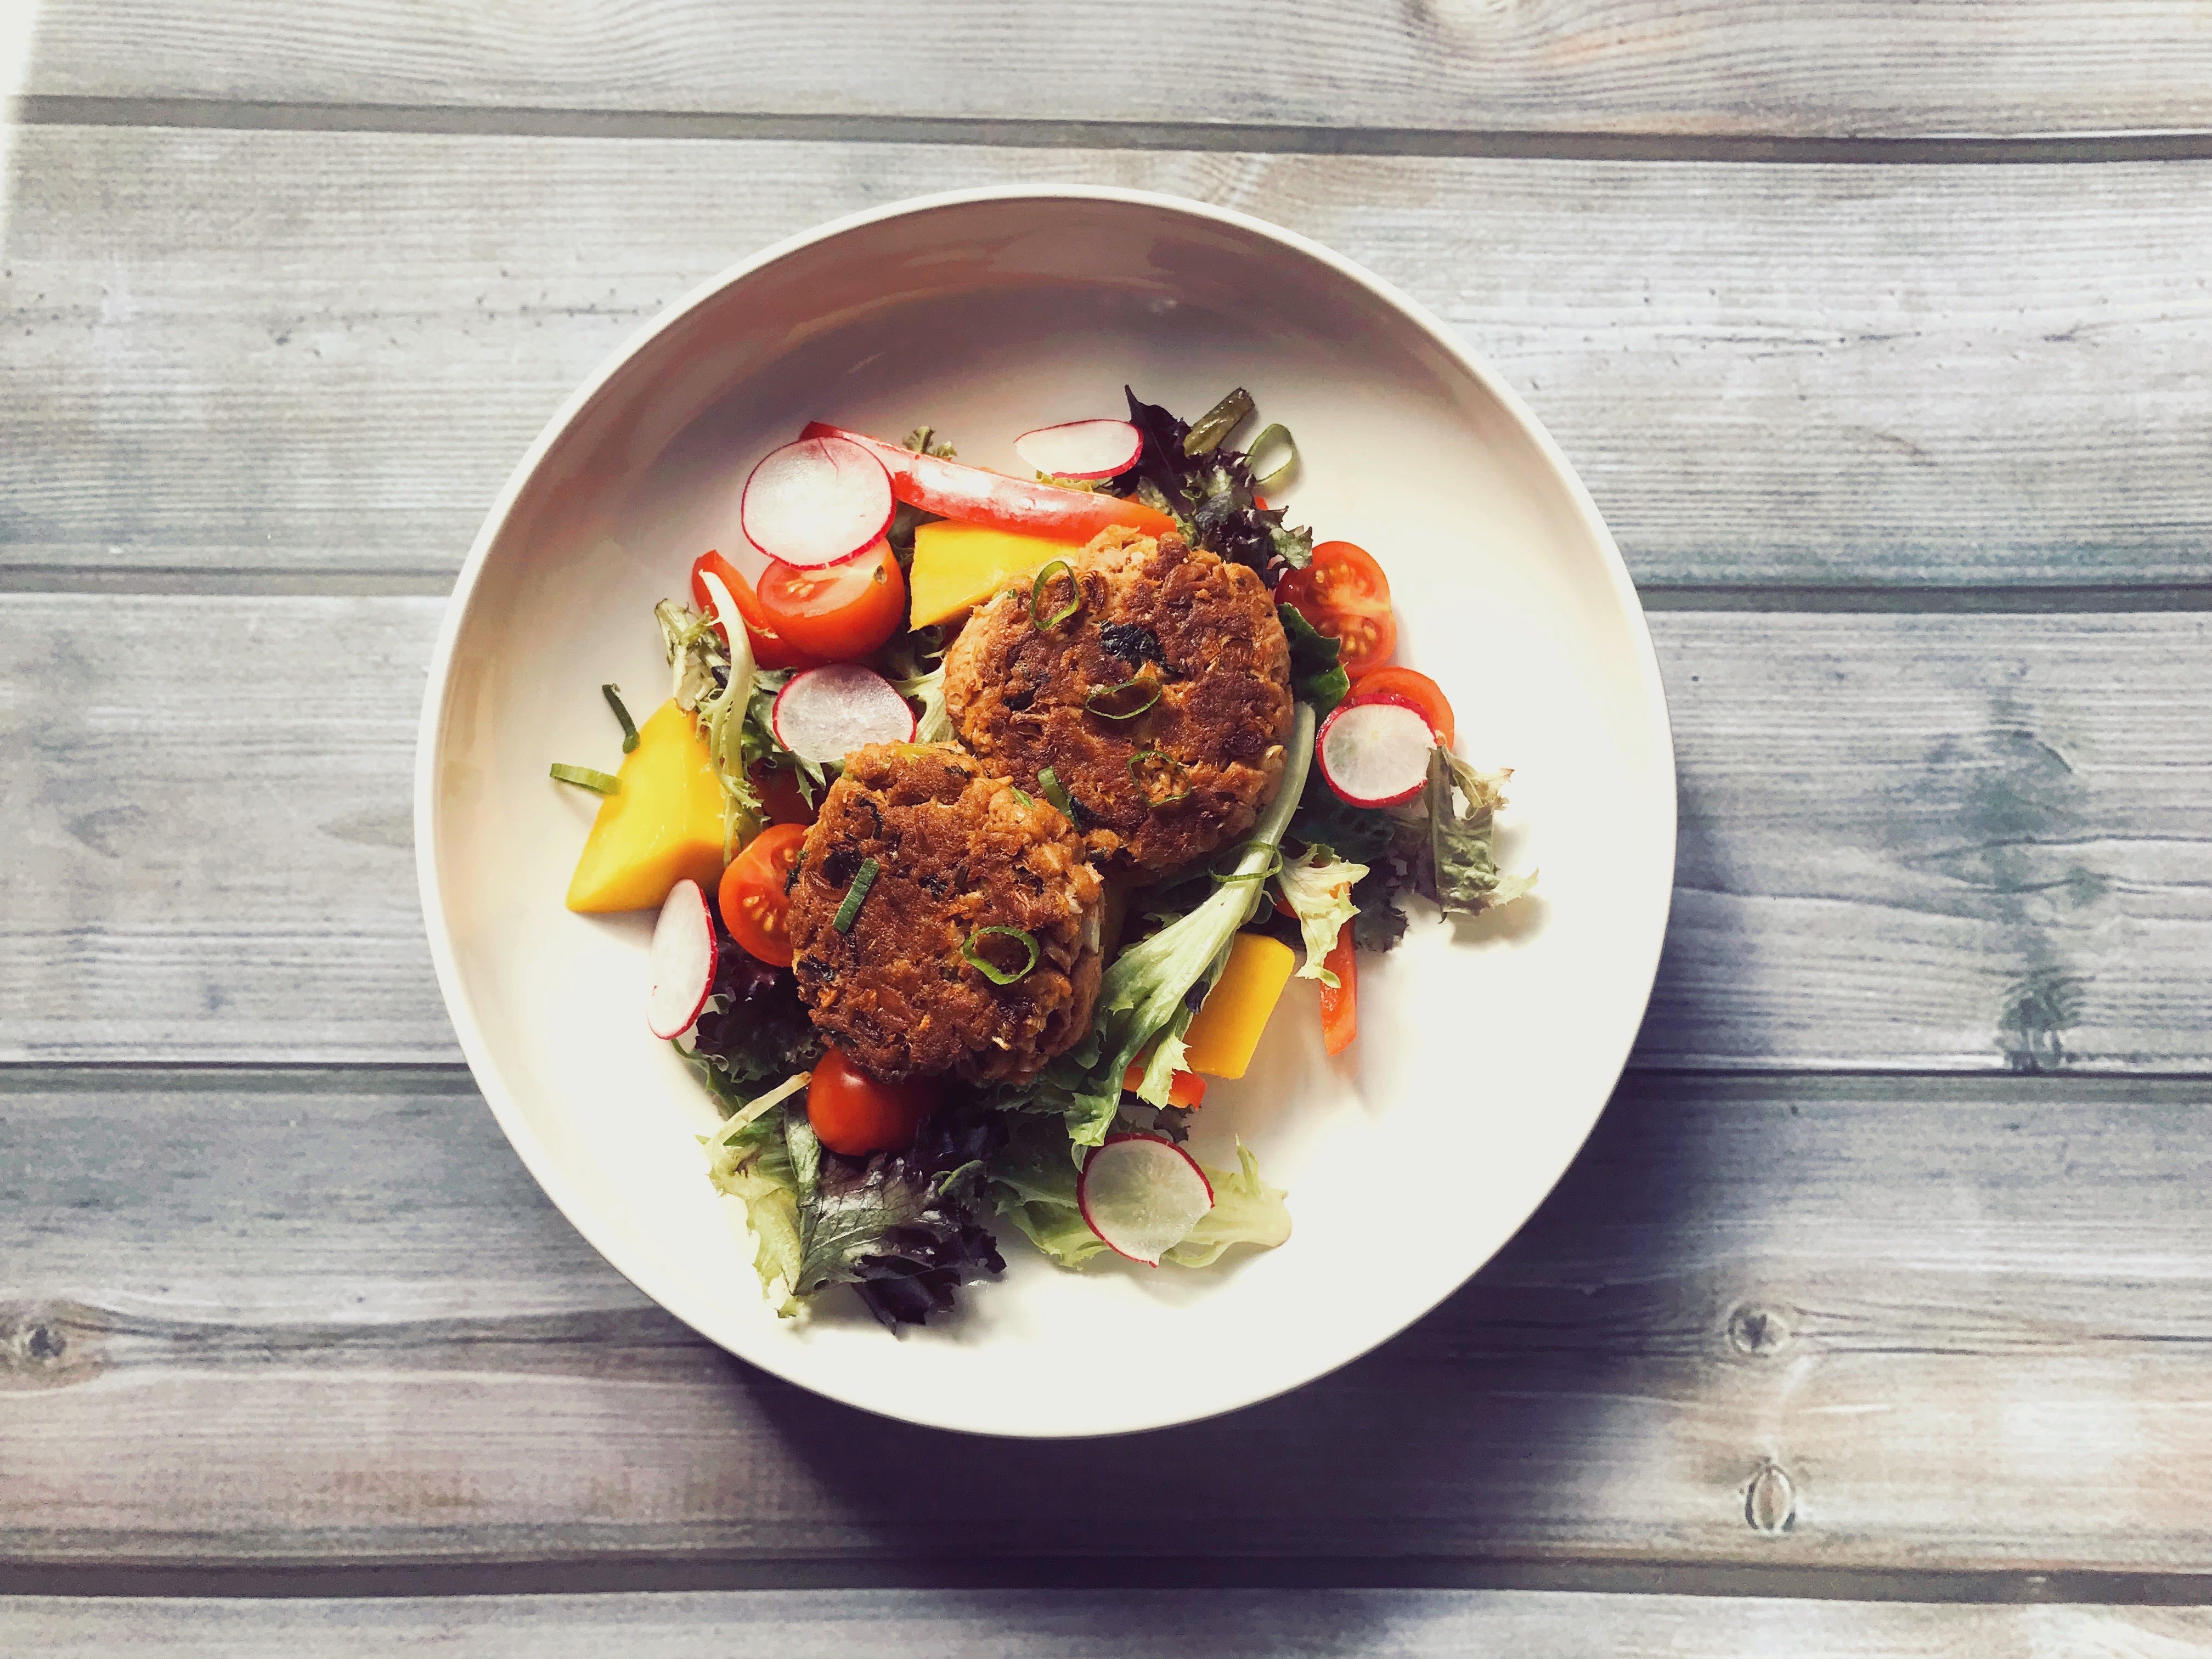 Fish Cakes with a Mango Salad